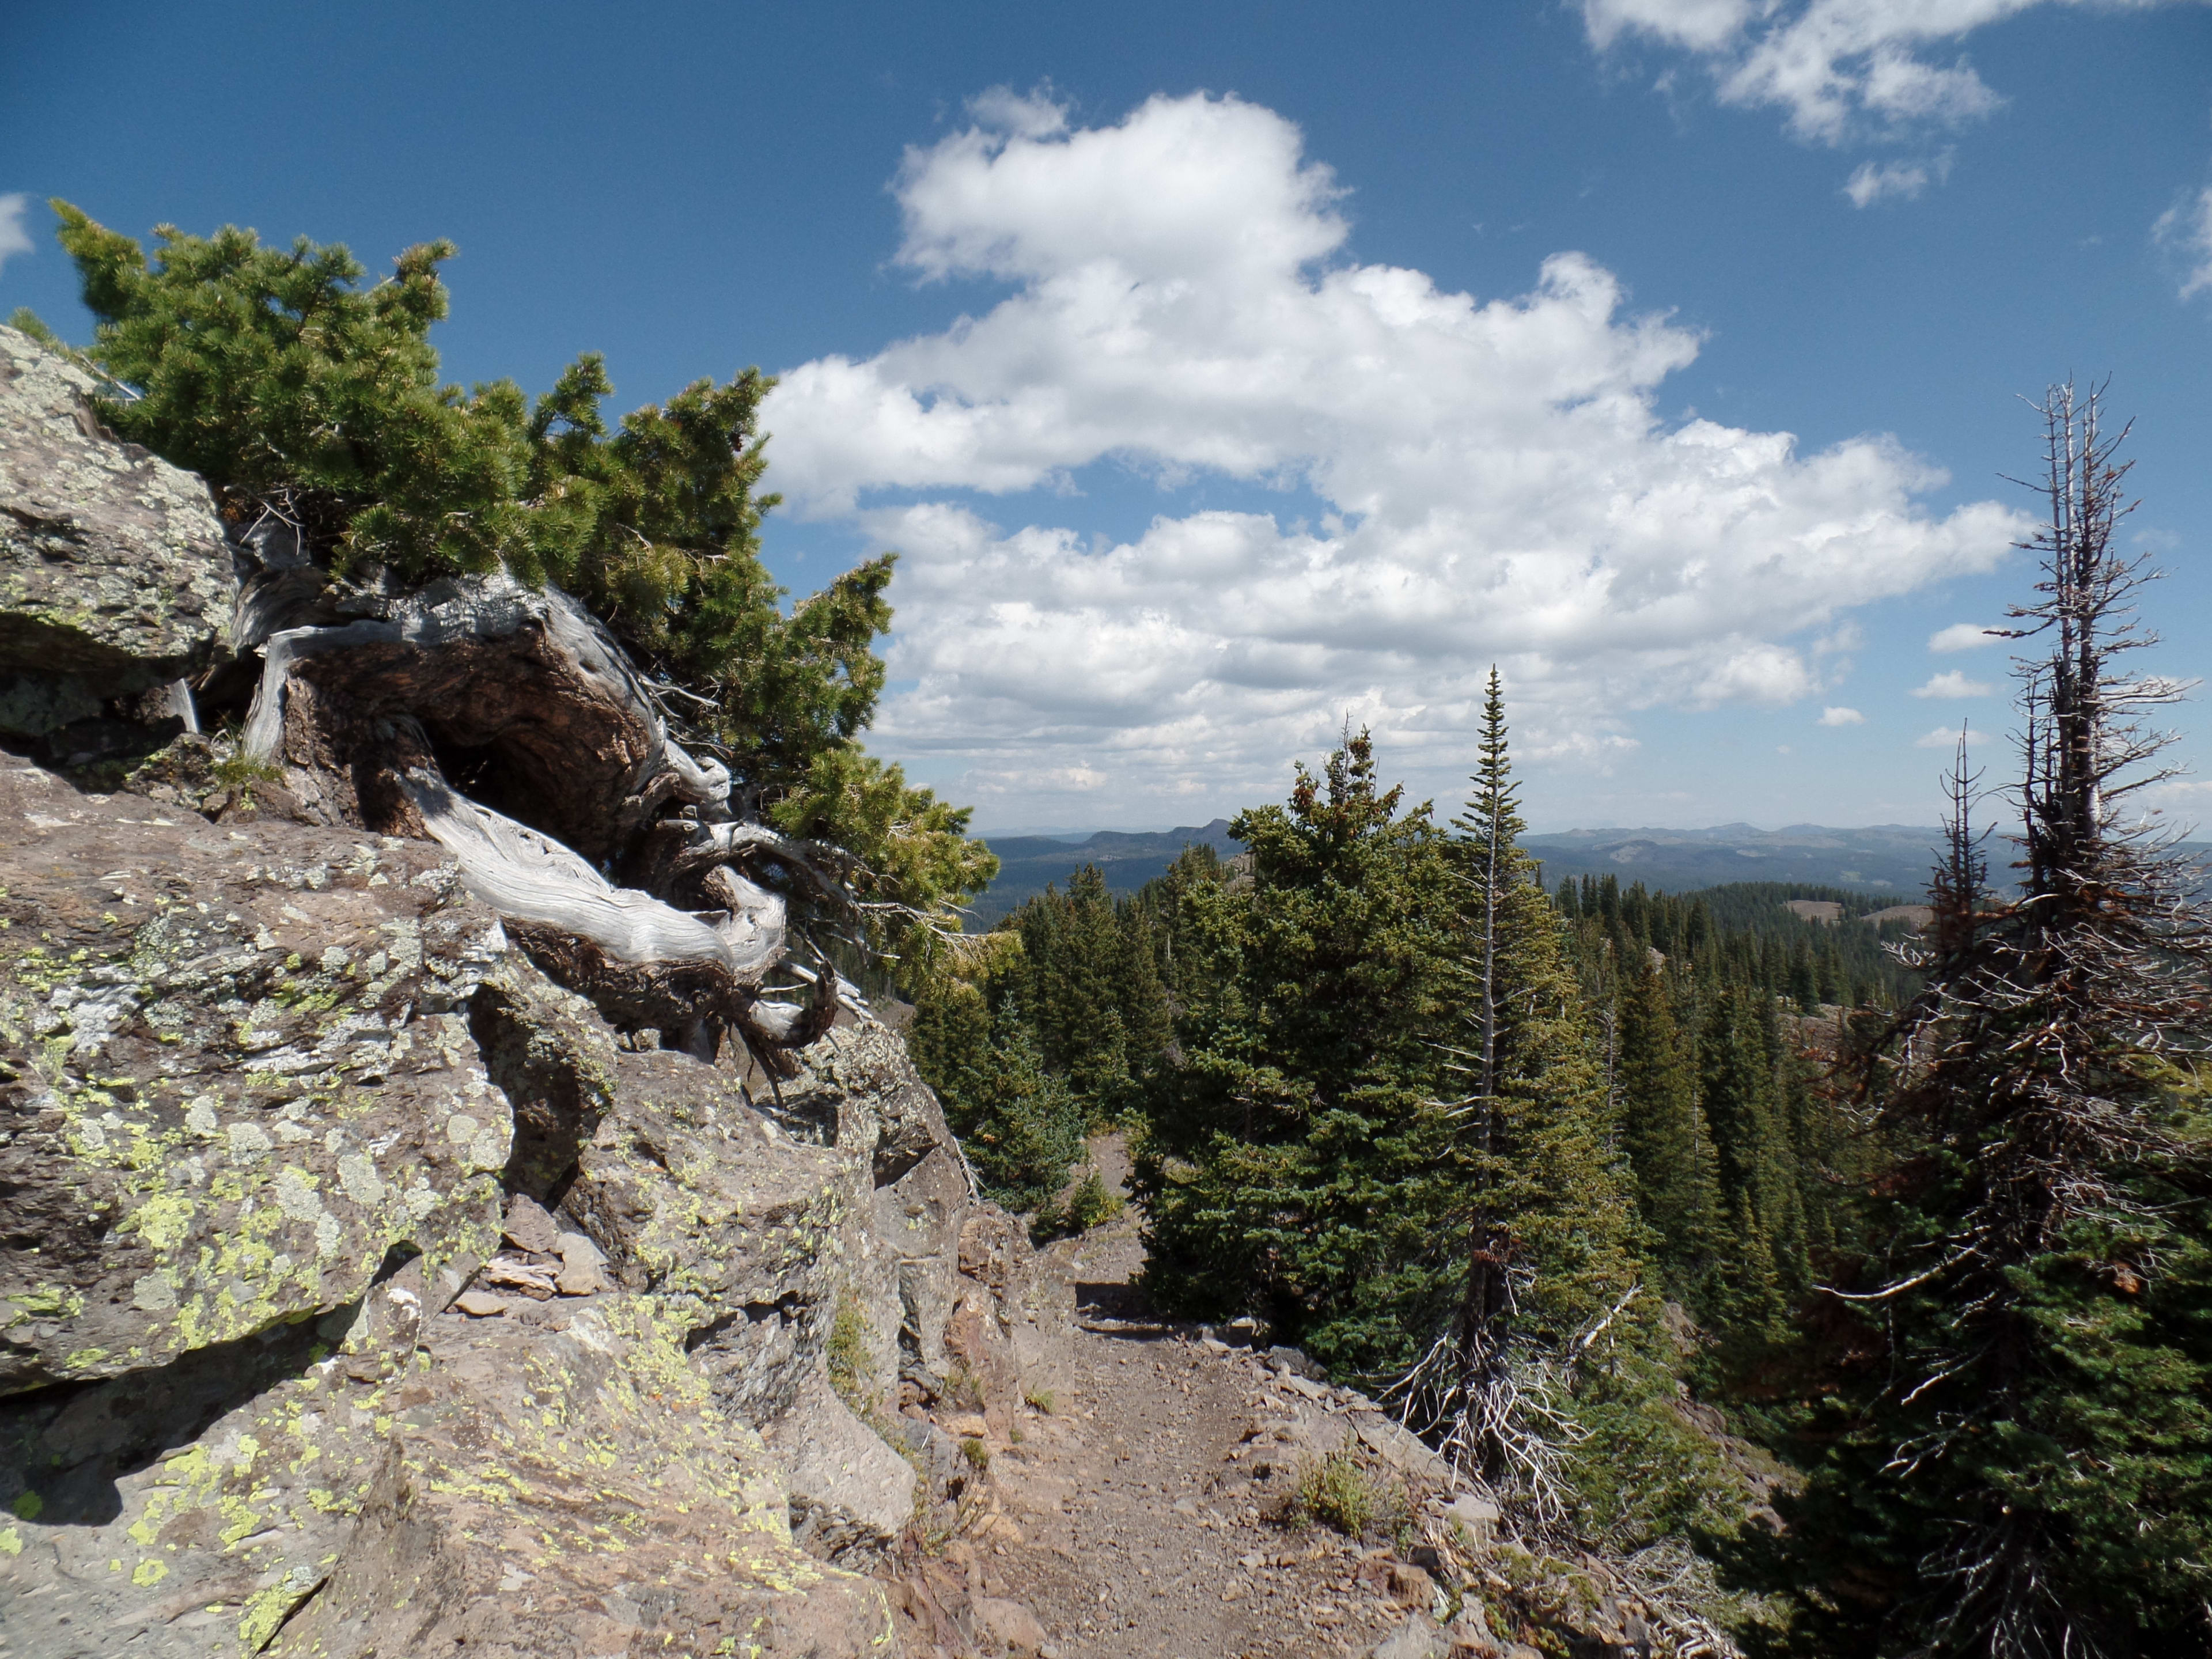 Grand Mesa National Forest